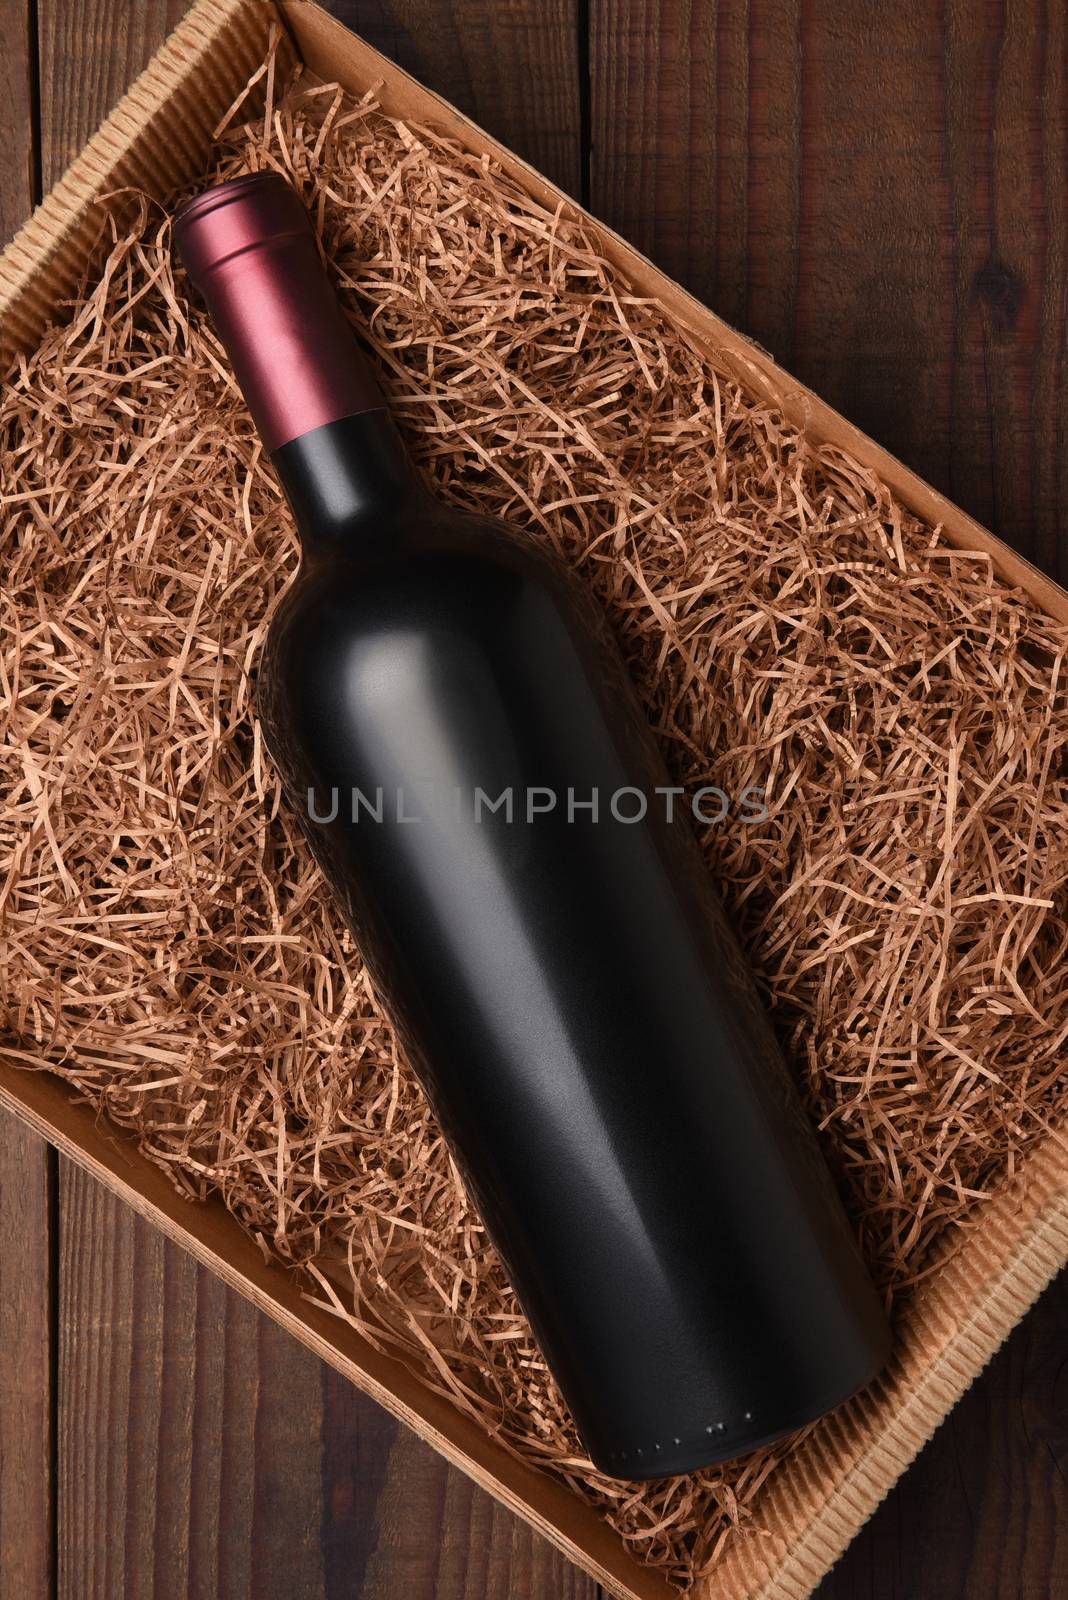 Cabernet Wine Bottle in Packing Straw: High angle shot of a single bottle with no label in a cardboard box with straw packing.